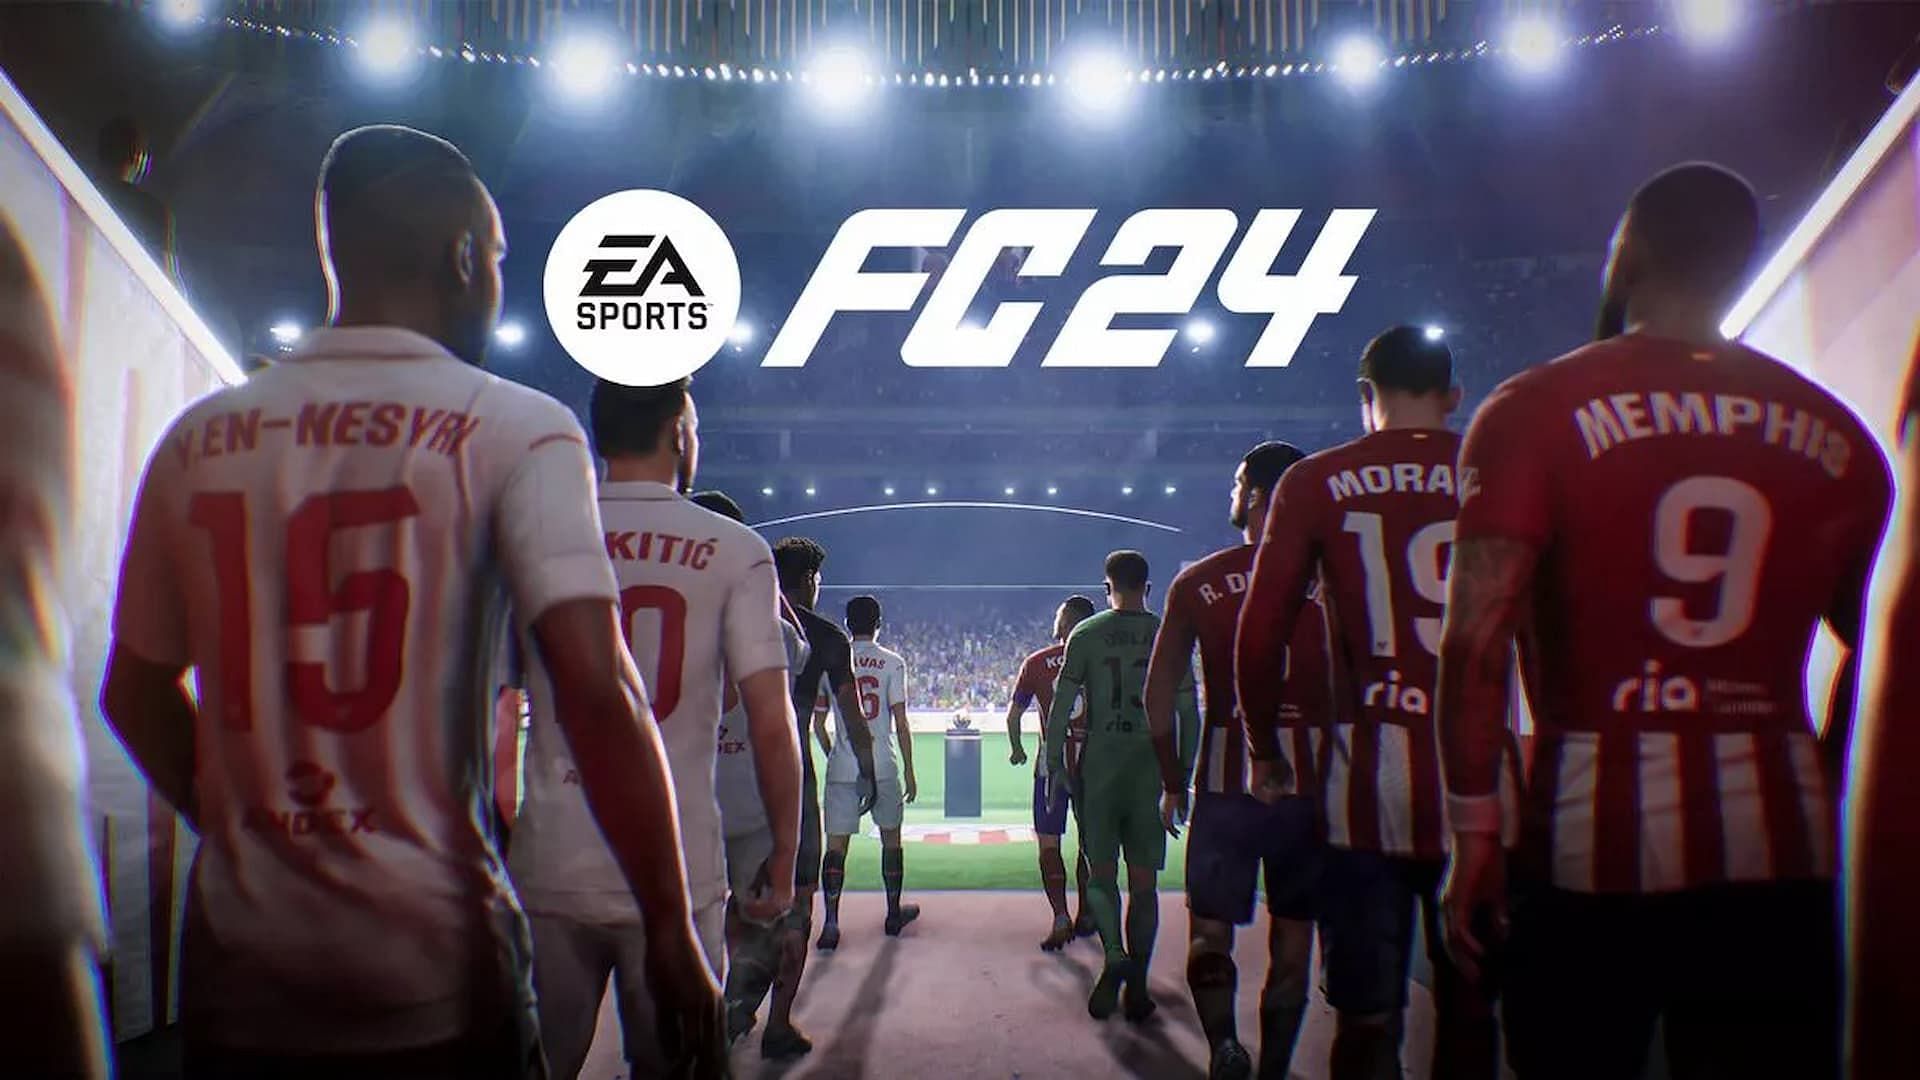 How to upgrade EA FC 24 from Xbox One to Xbox Series X version